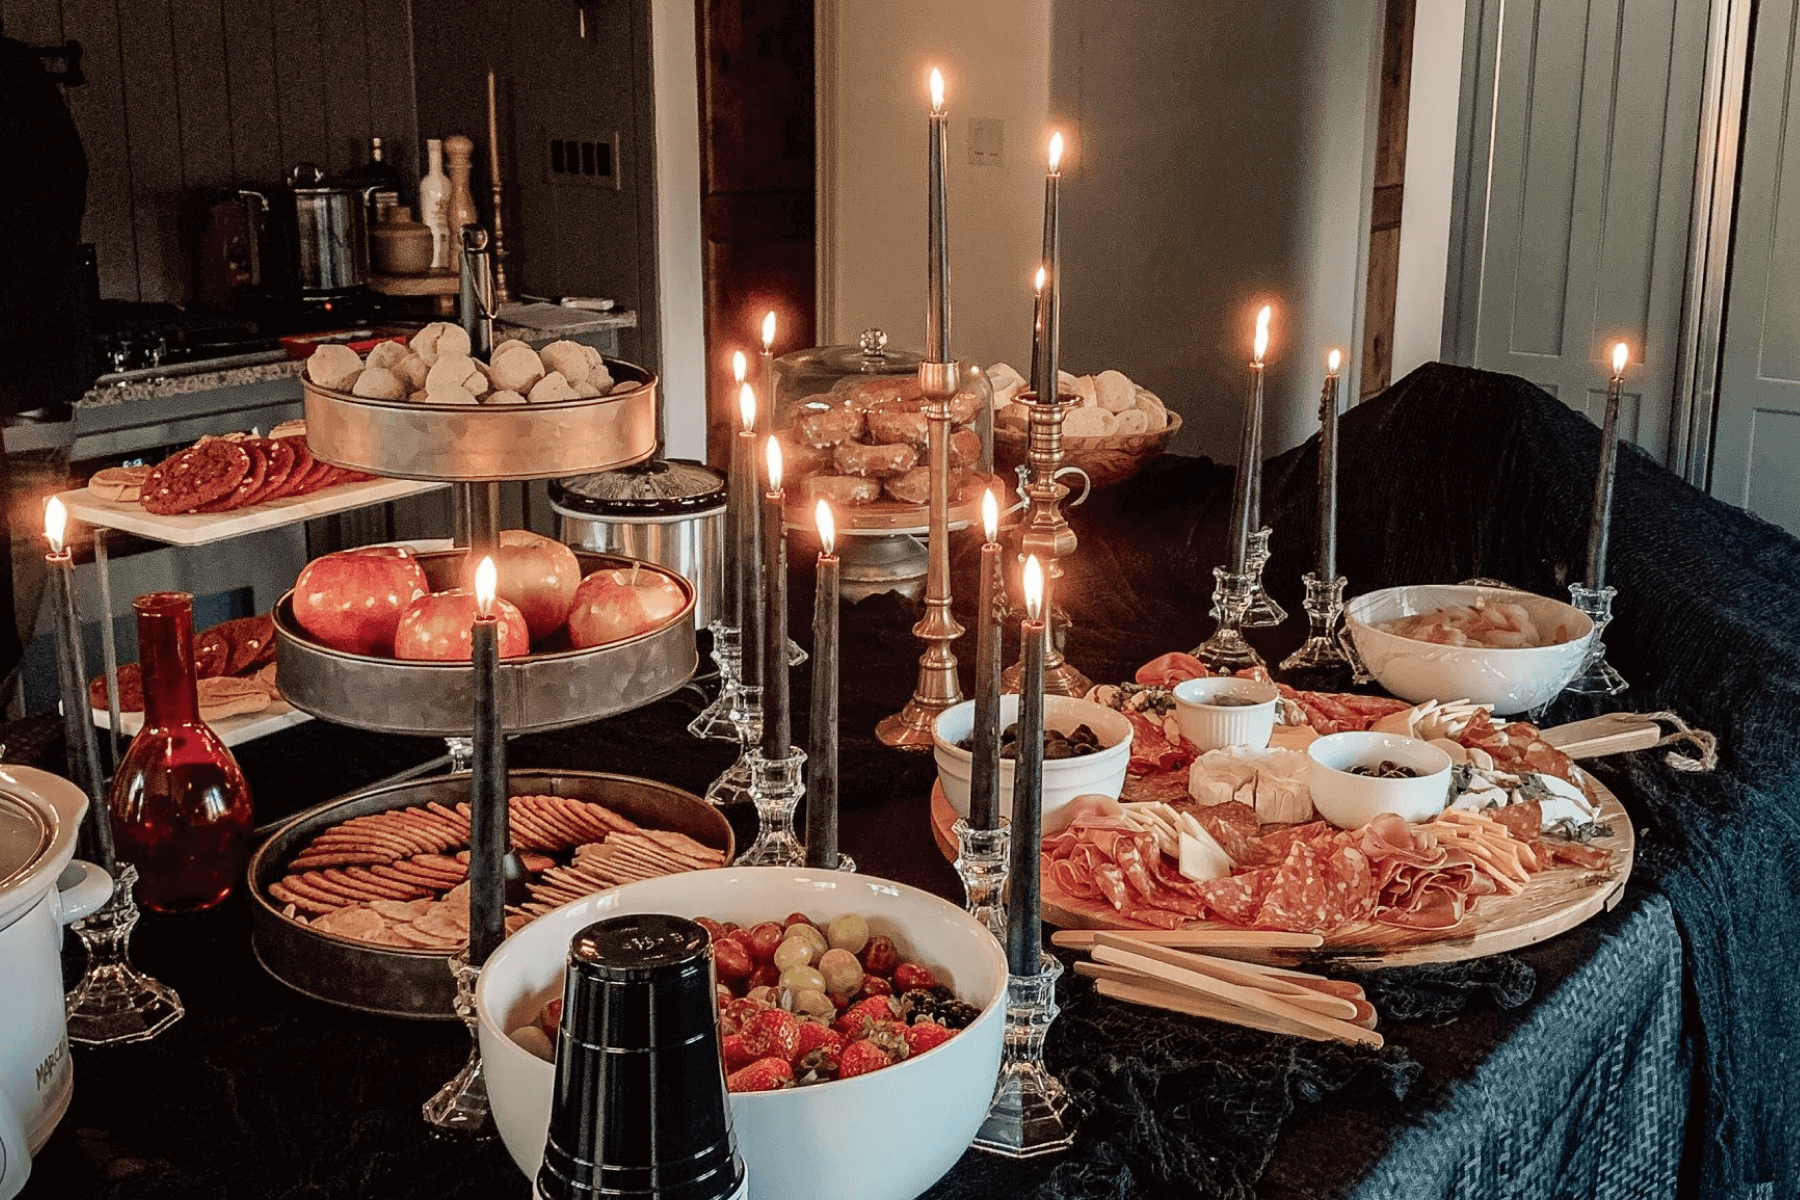 An eerie tablescape with black tapered candles and lots of savory snack options like charcuterie and crackers.